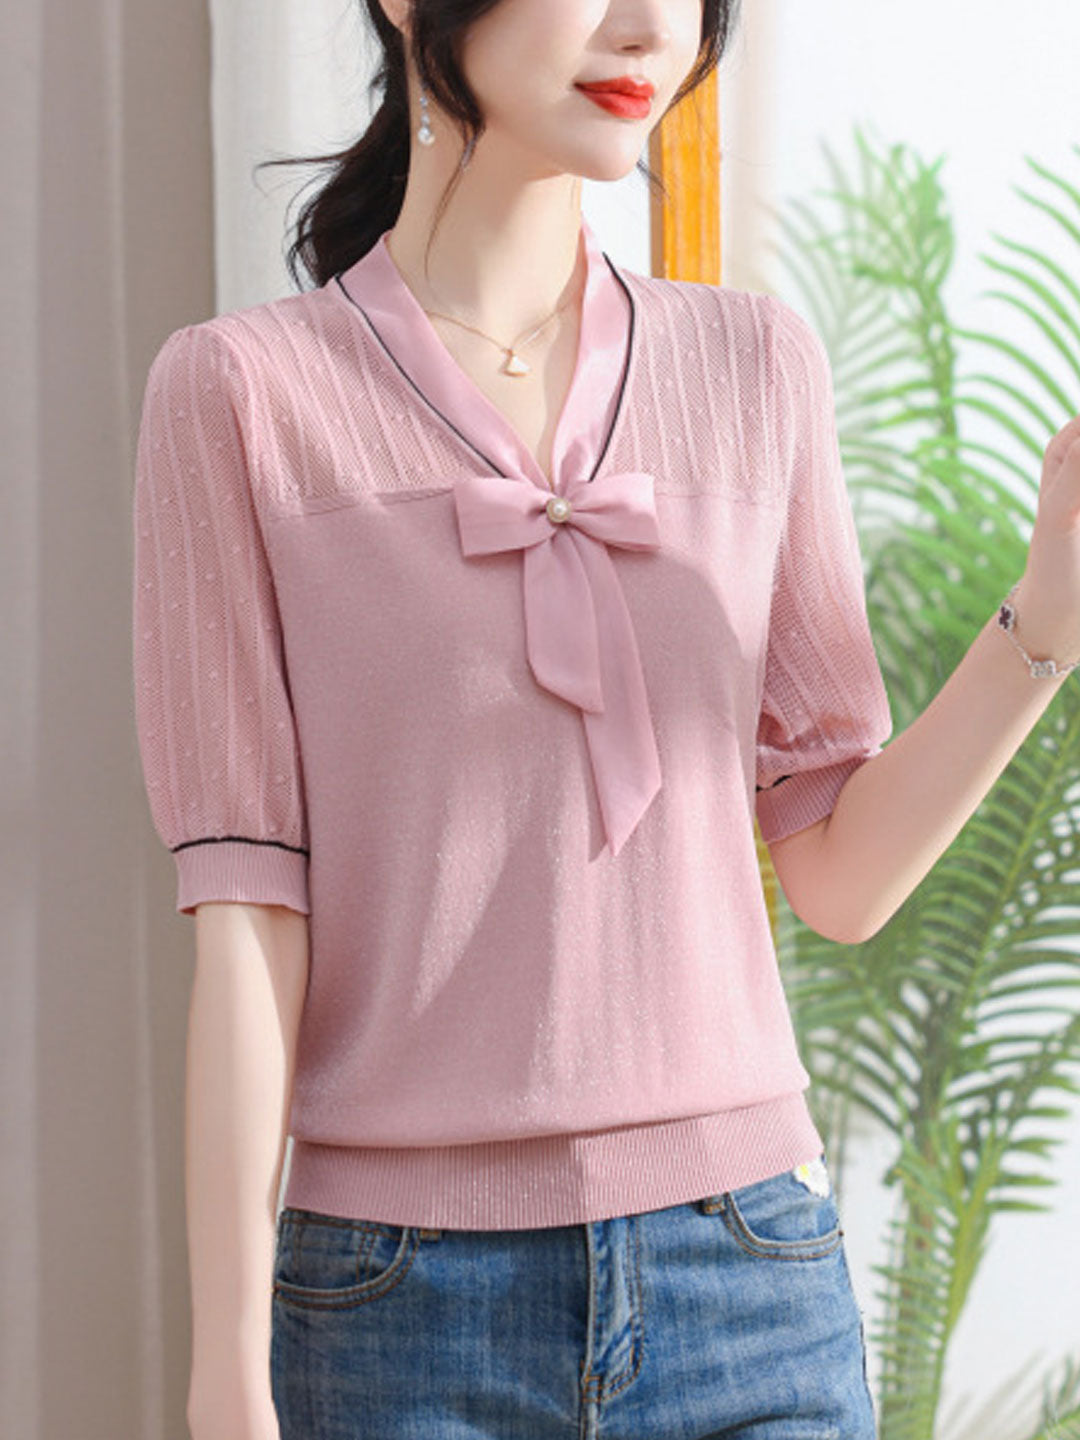 Ava Classic V-Neck Bow Ice Silk Knitted Top